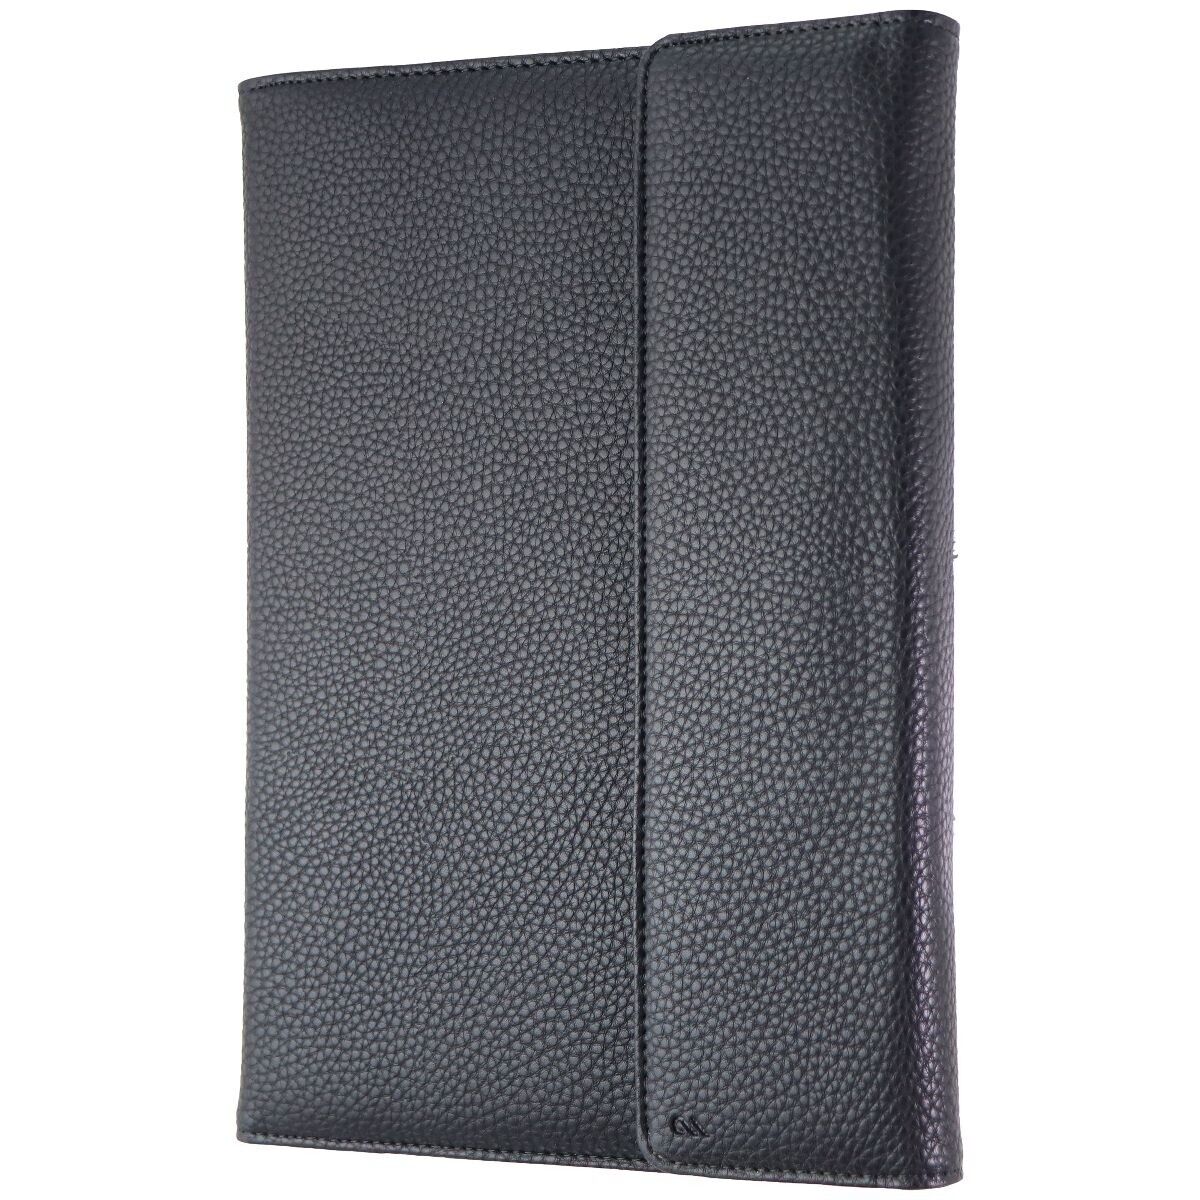 Case-Mate Venture Series Folio Case for (7 to 8.5-inch) Tablets - Black Leather